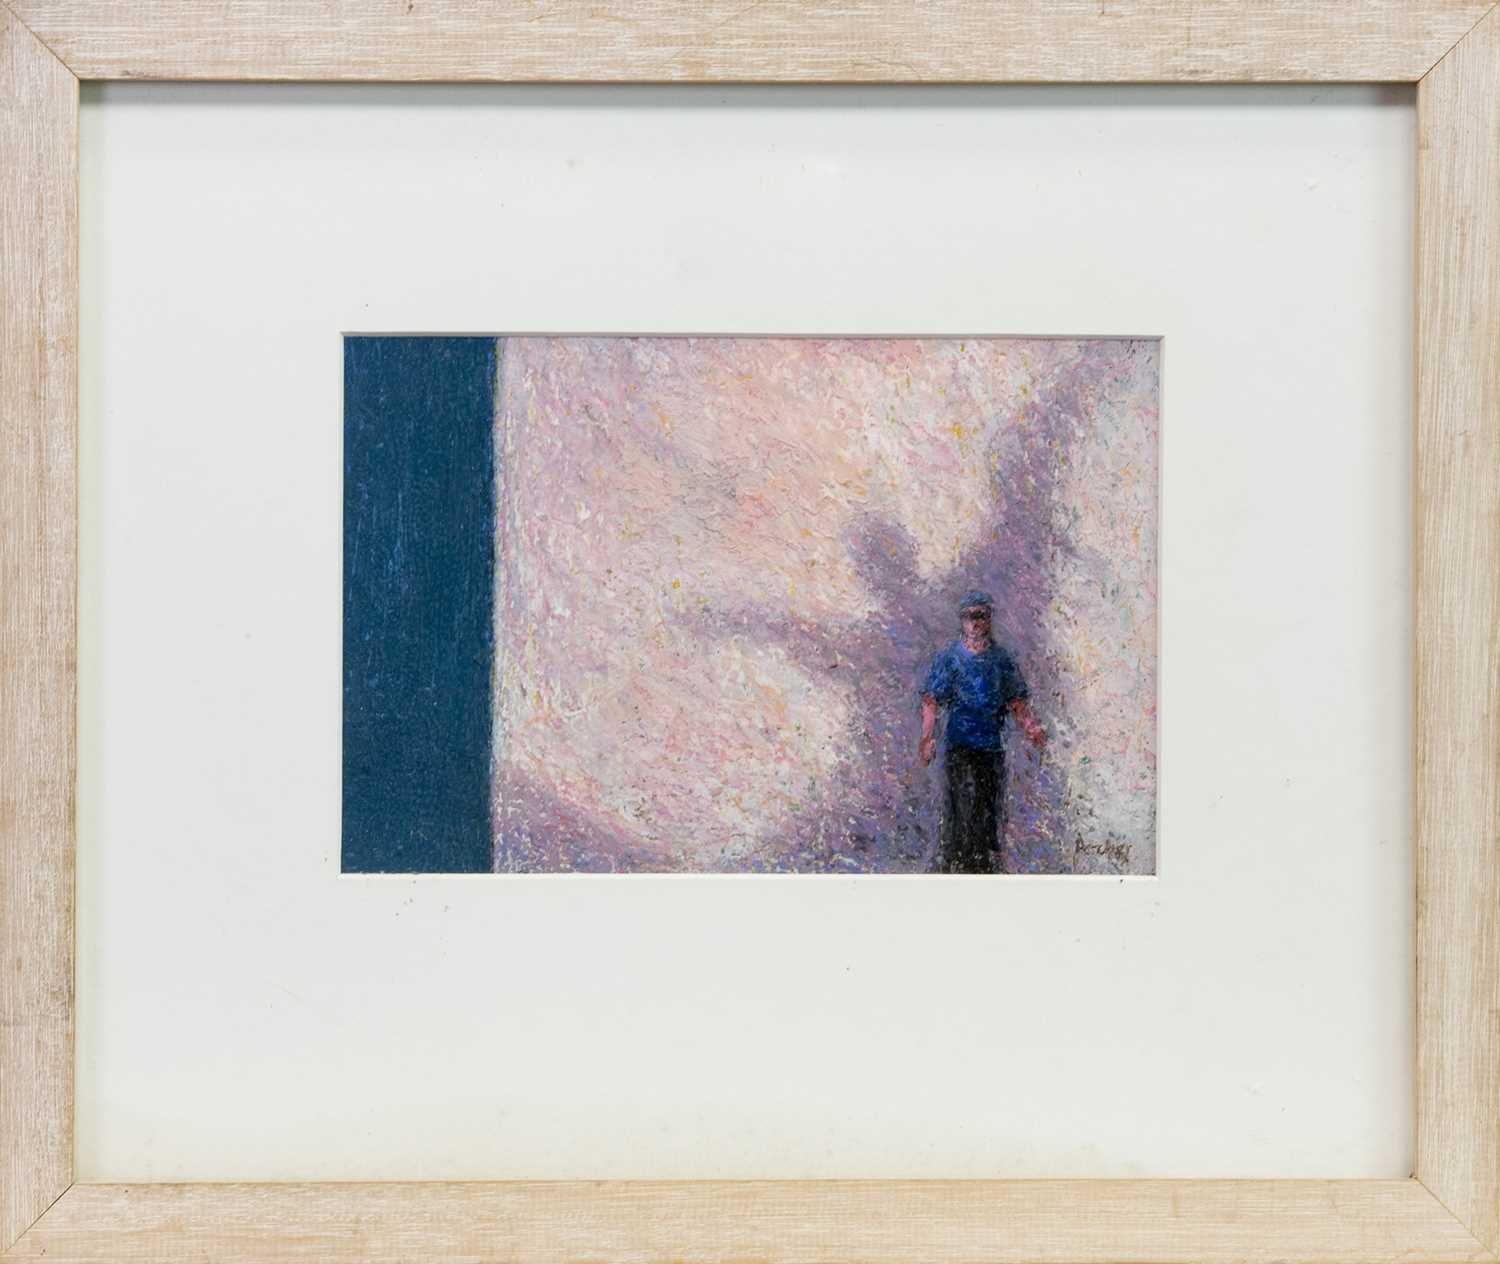 Lot 546 - FIGURE AND SHADOW, A PASTEL BY PHILIP ARCHER